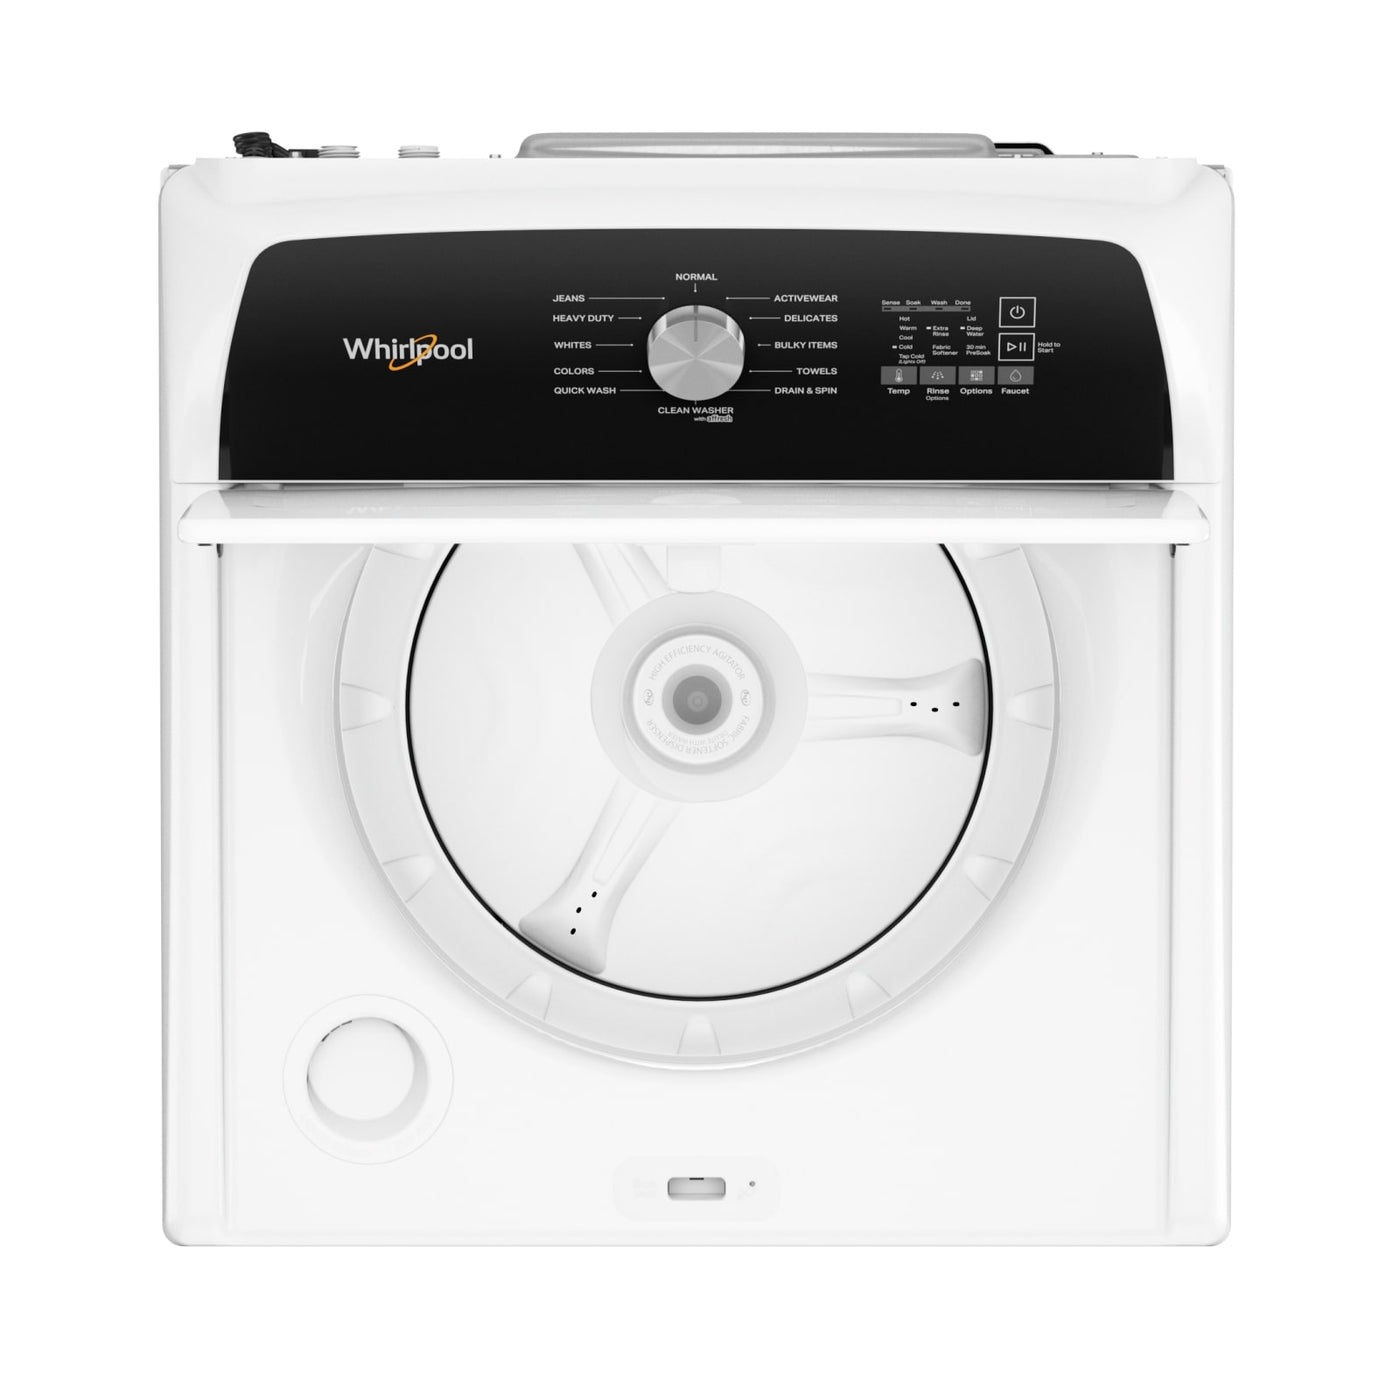 Whirlpool White Top Load Washer with Built-In Faucet (5.2 Cu.Ft.) - WTW5015LW